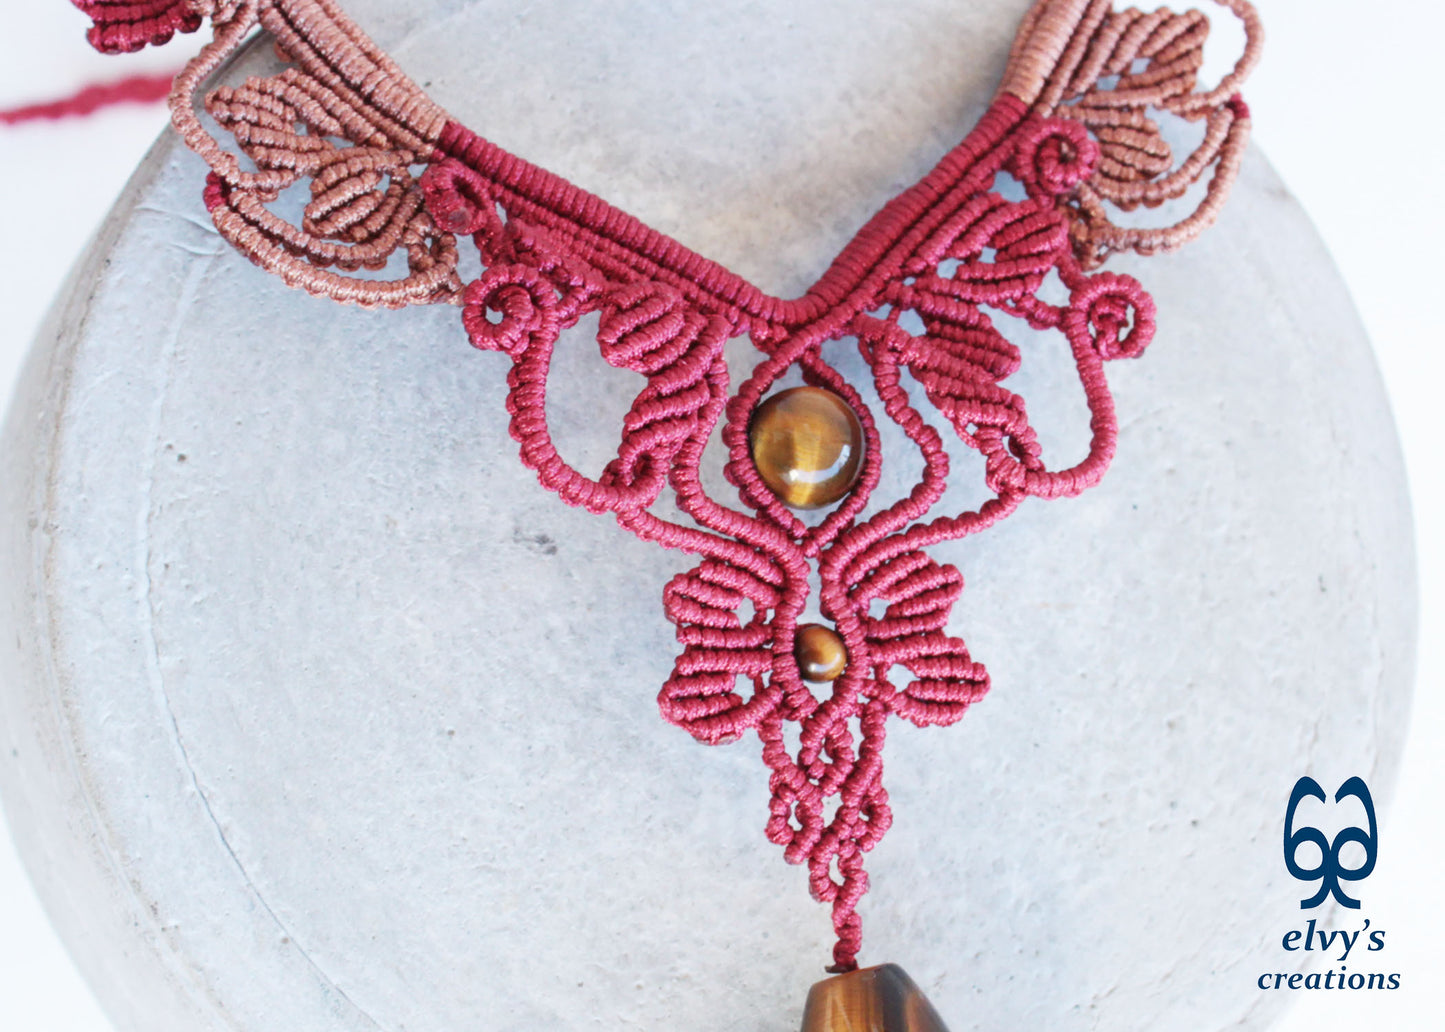 Red and Beige Macrame Necklace Handmade Macrame with Tiger Eye Gemstones